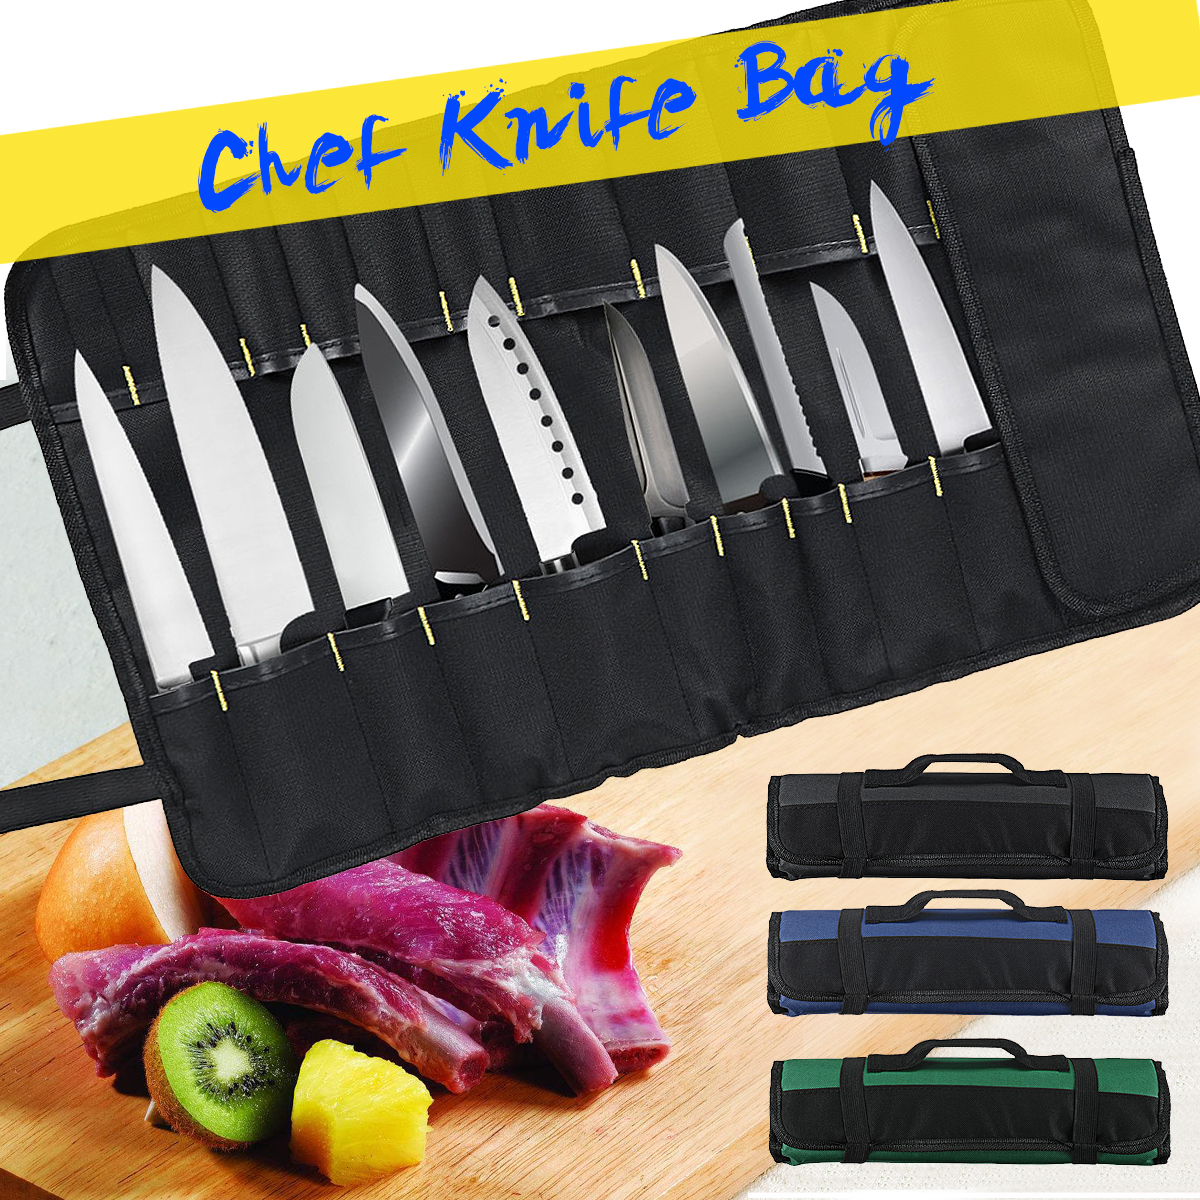 Oxford-Cloth-22-Slots-Pocket-Chef-Bag-Roll-Carry-Case-Portable-Storage-1403287